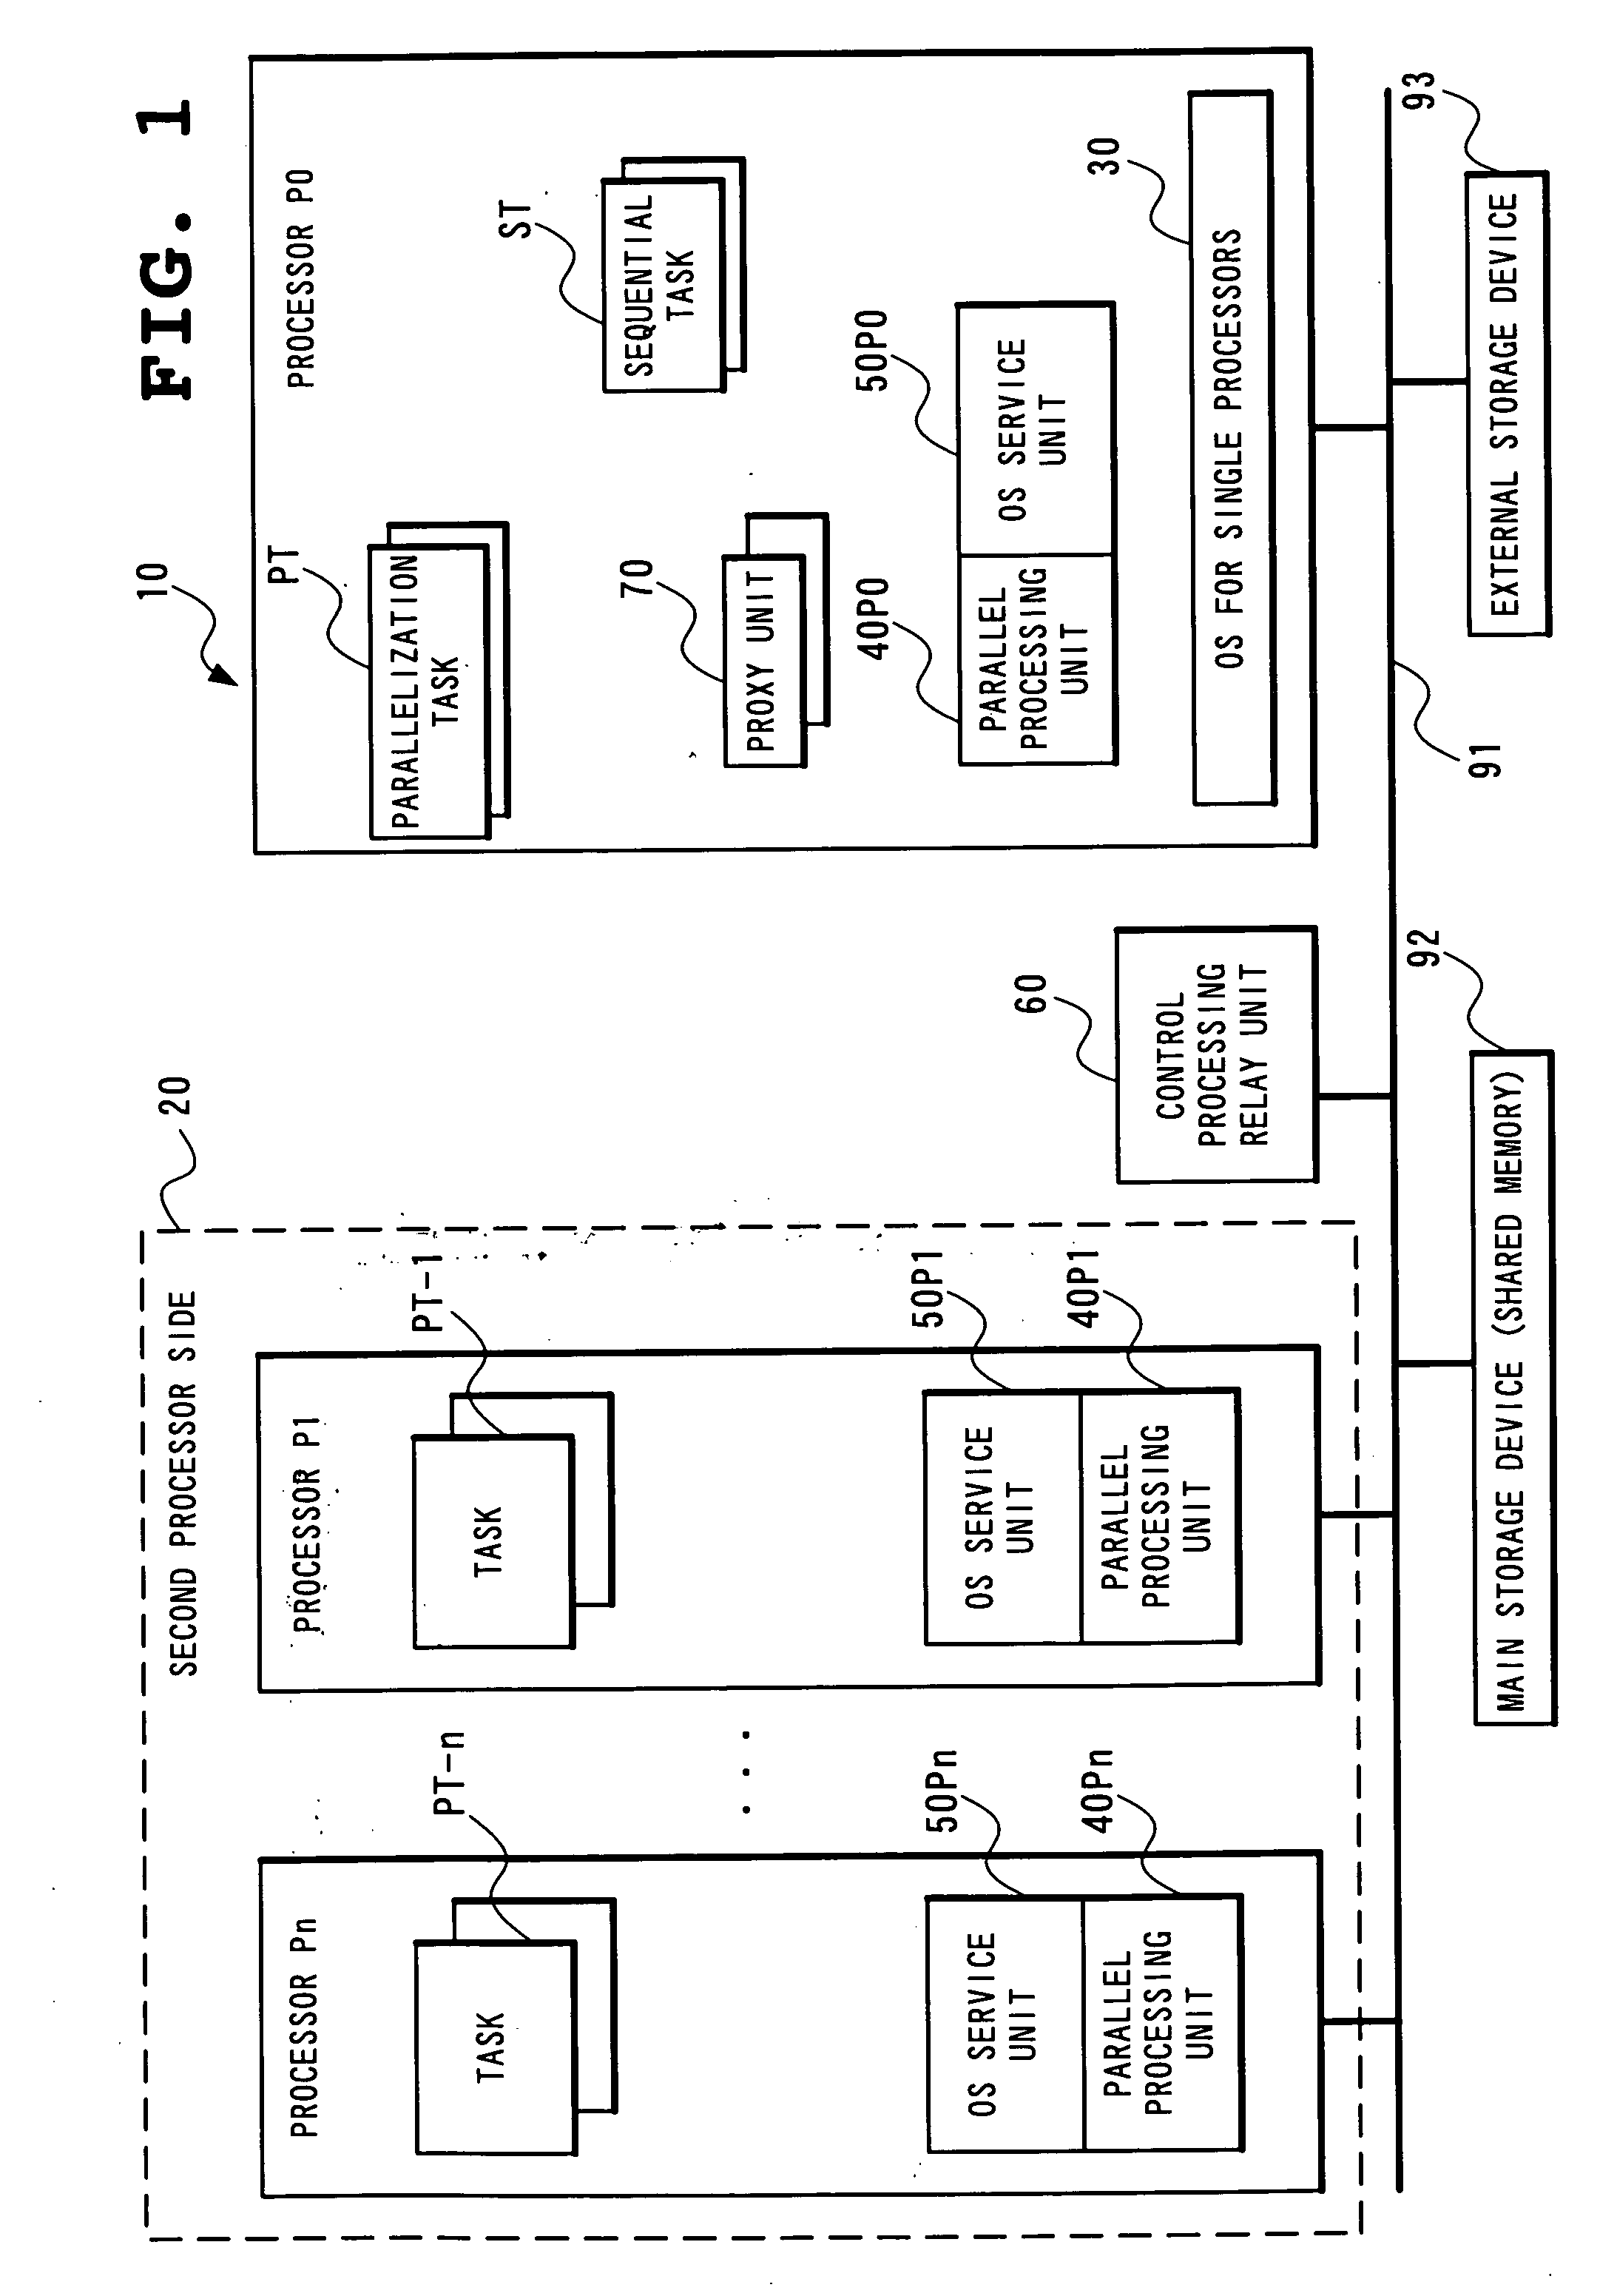 Inter-processor communication system in parallel processing system by OS for single processors and program thereof